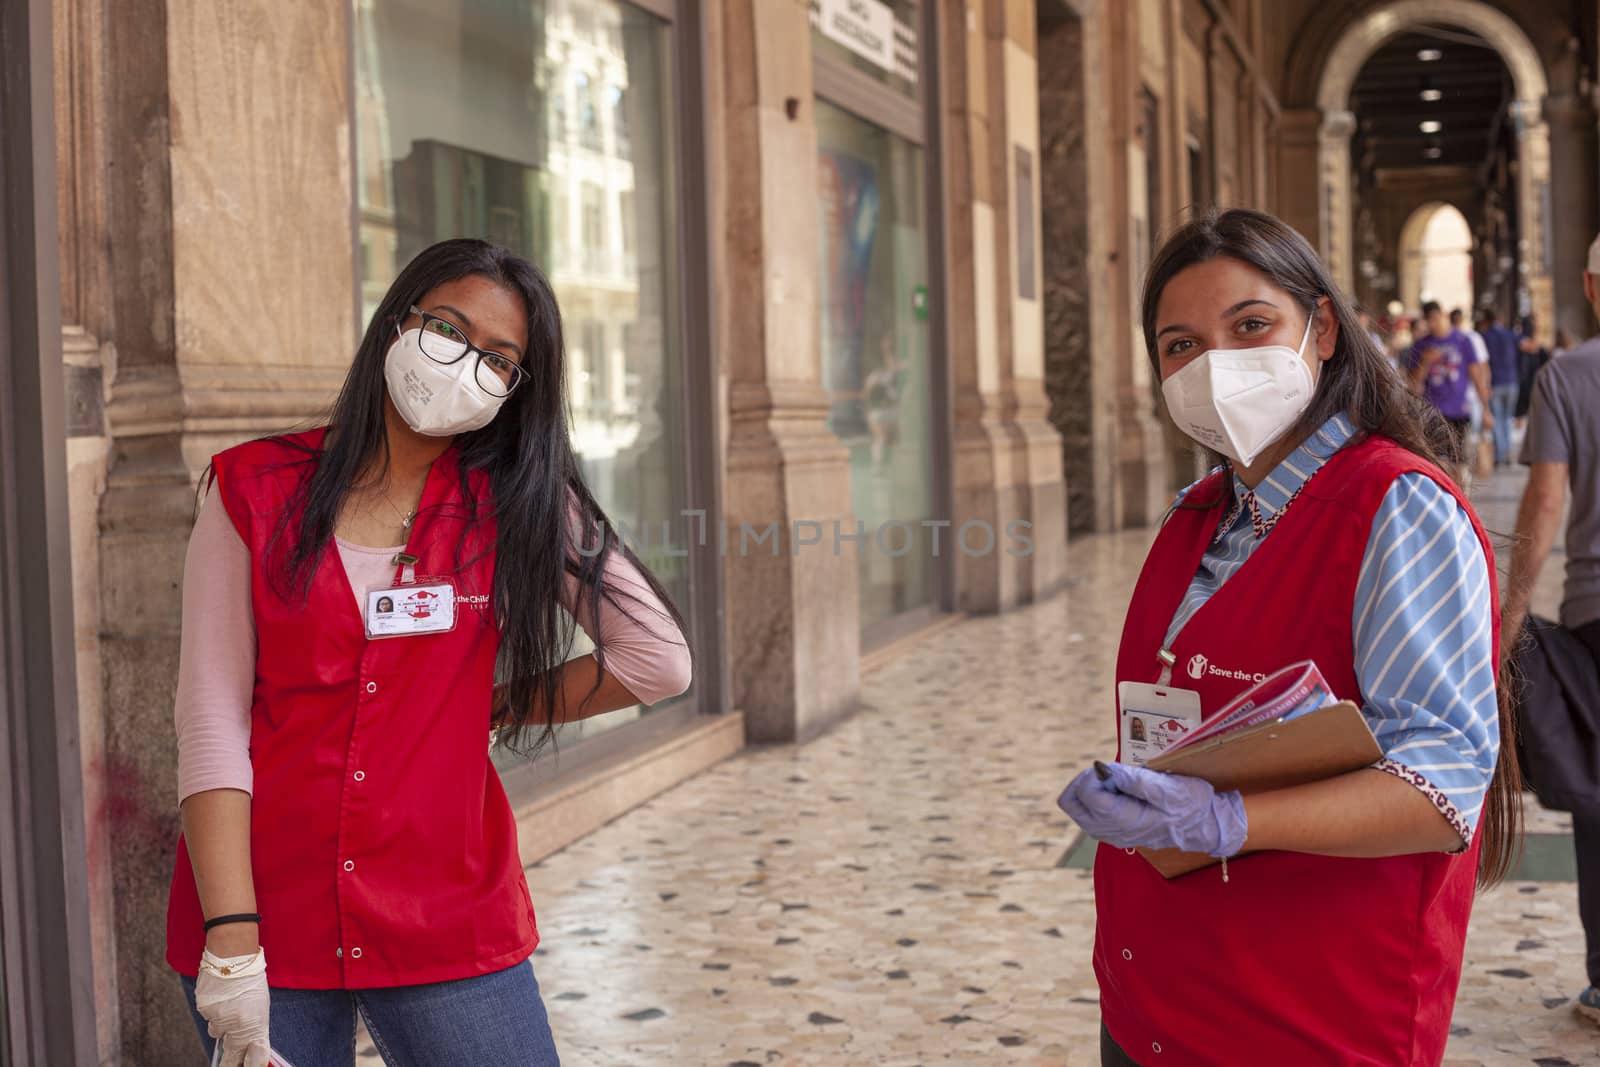 BOLOGNA, ITALY 17 JUNE 2020: Promoter for save the children on the streets